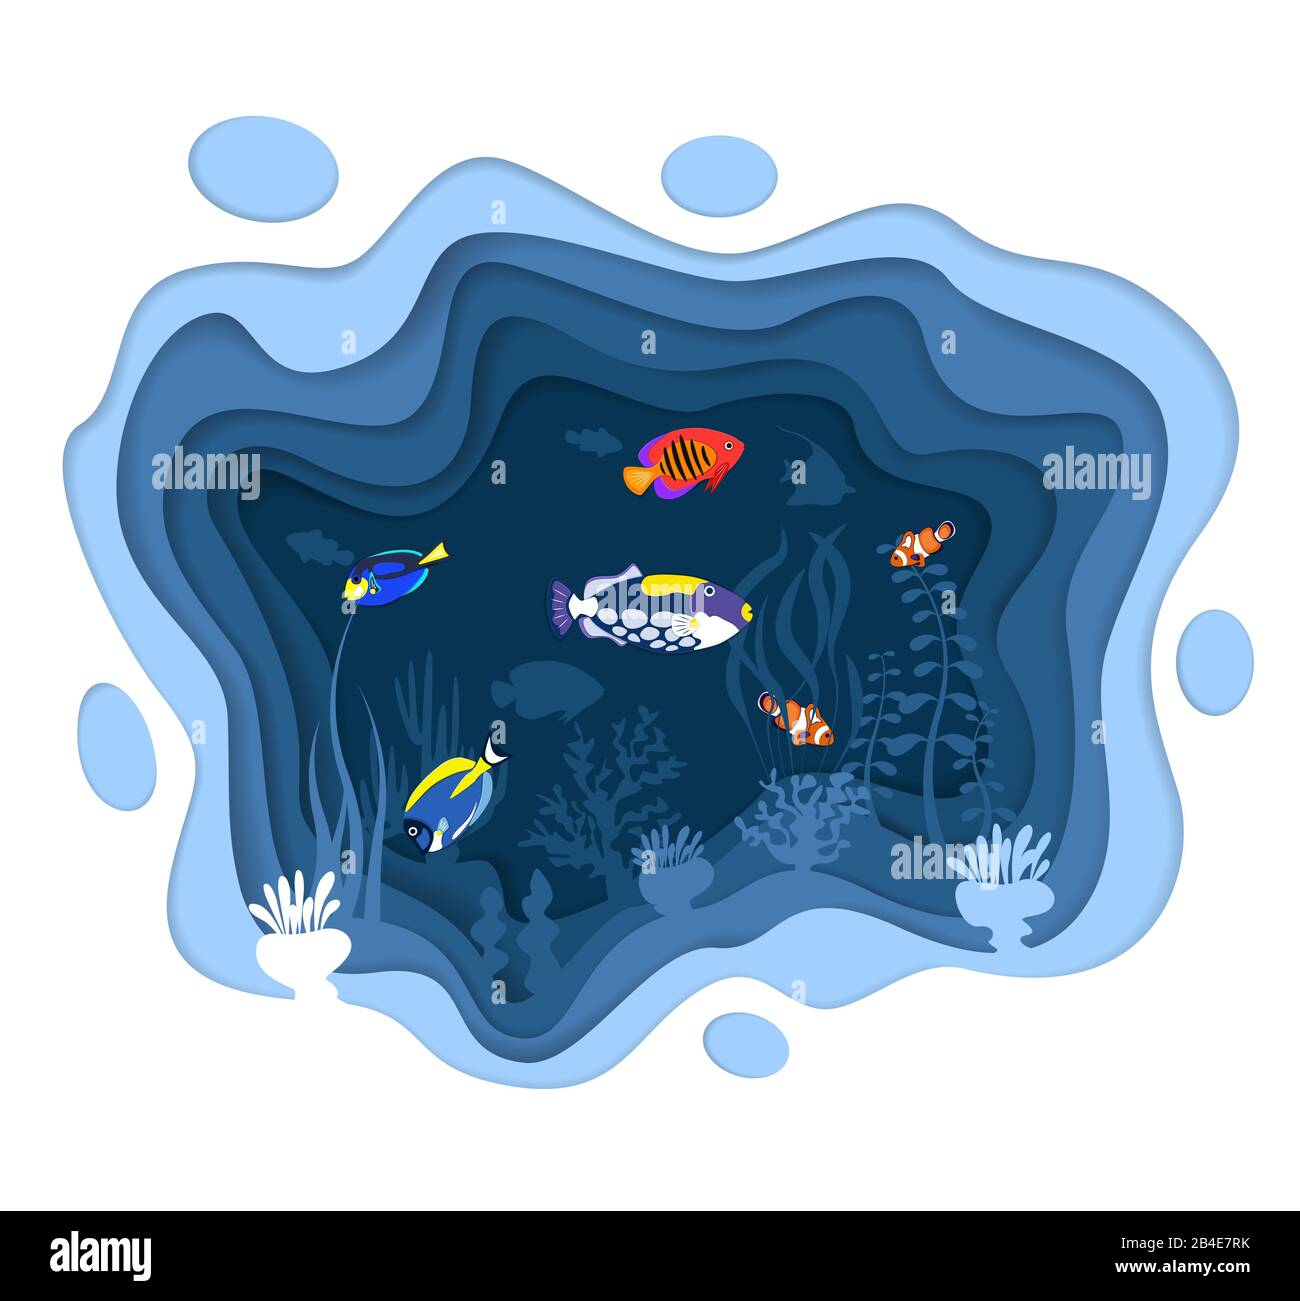 Underwater world design with coral reef fishes Stock Vector